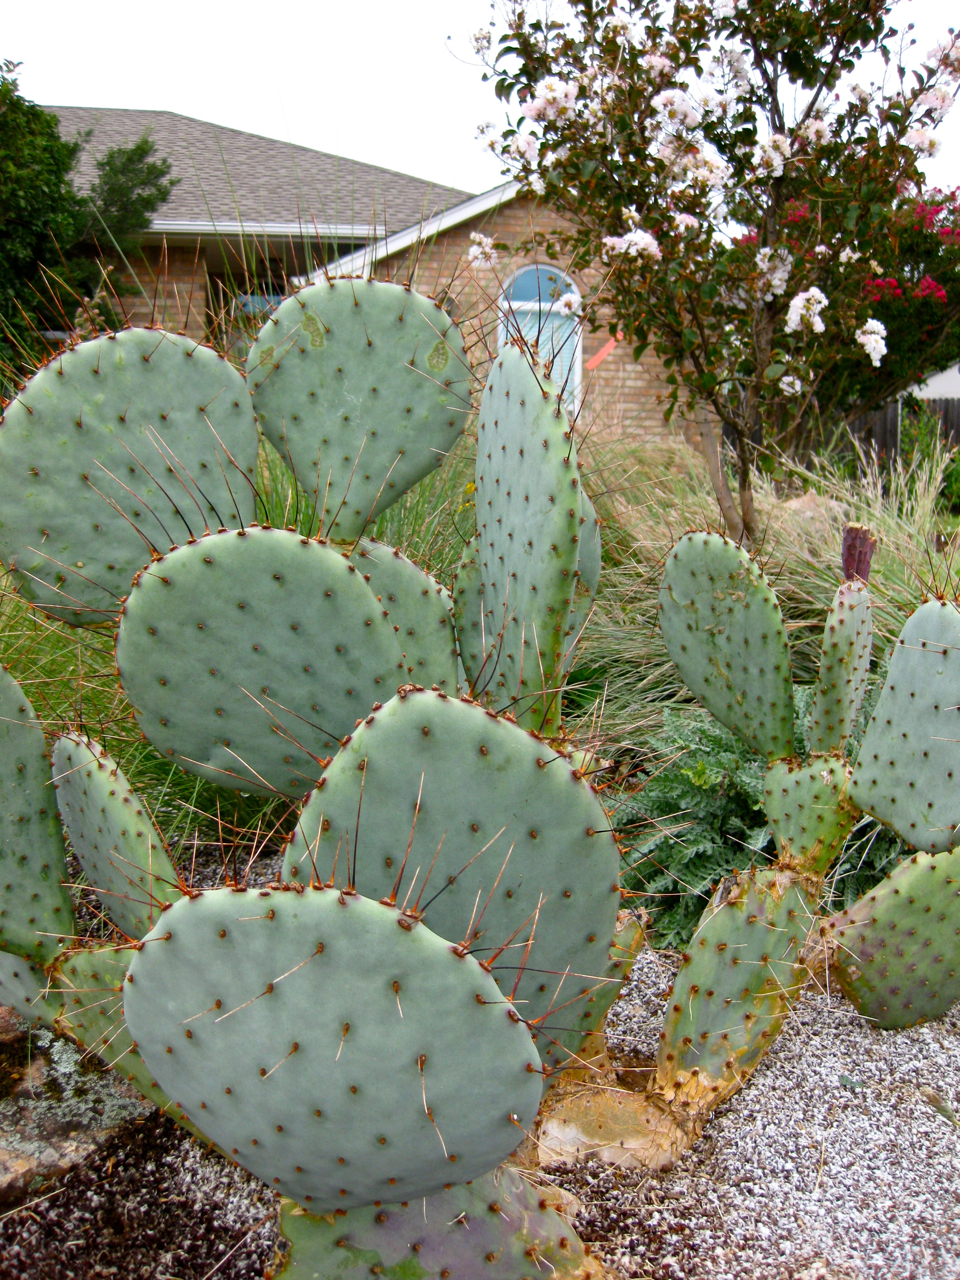 Opuntia Prickly Pear Cactus Eco Landscaping